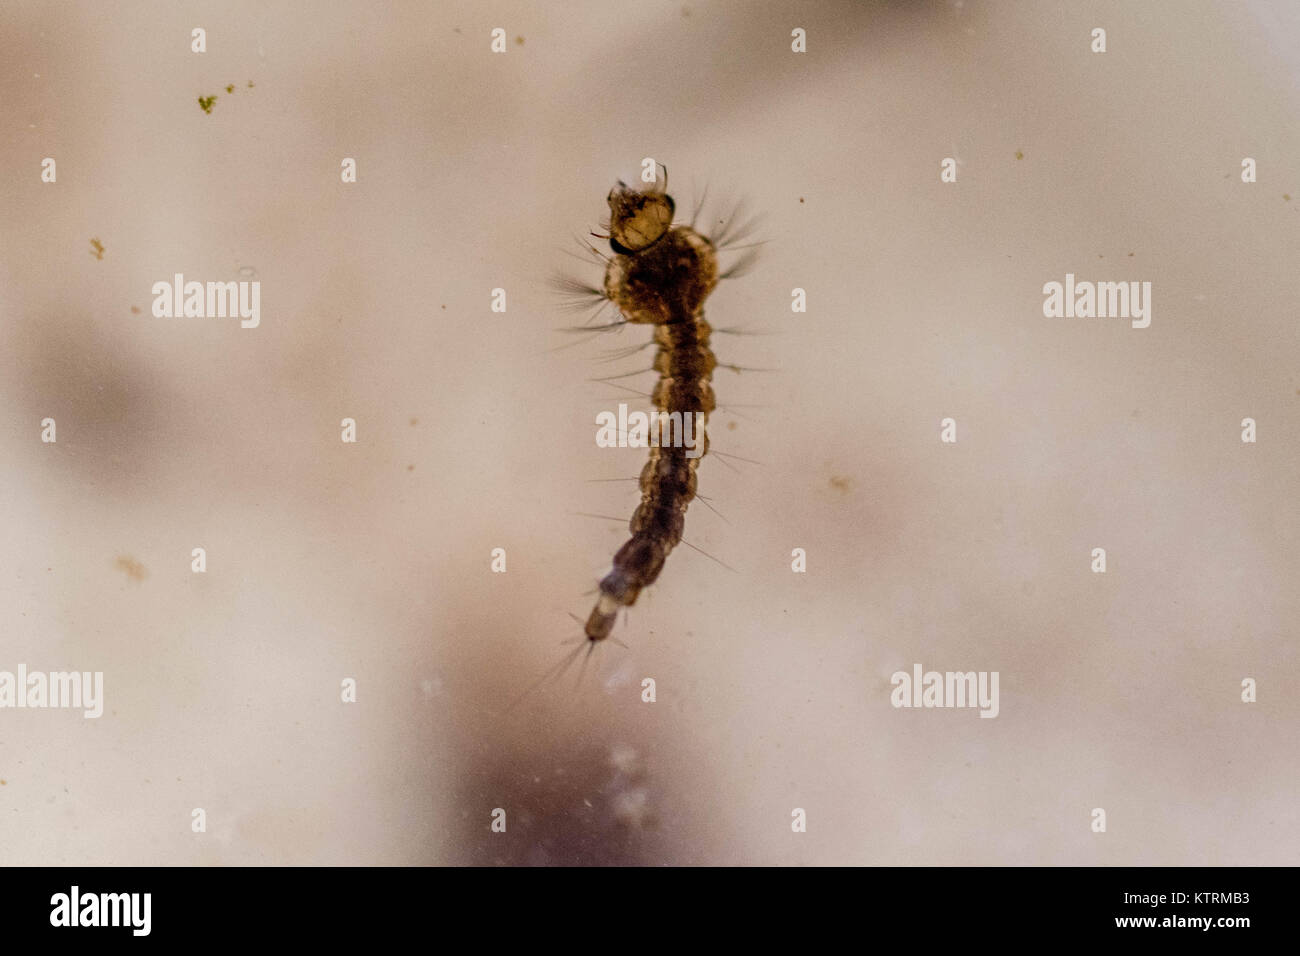 Microscopic view of mosquito larvae in a Petri dish Stock Photo